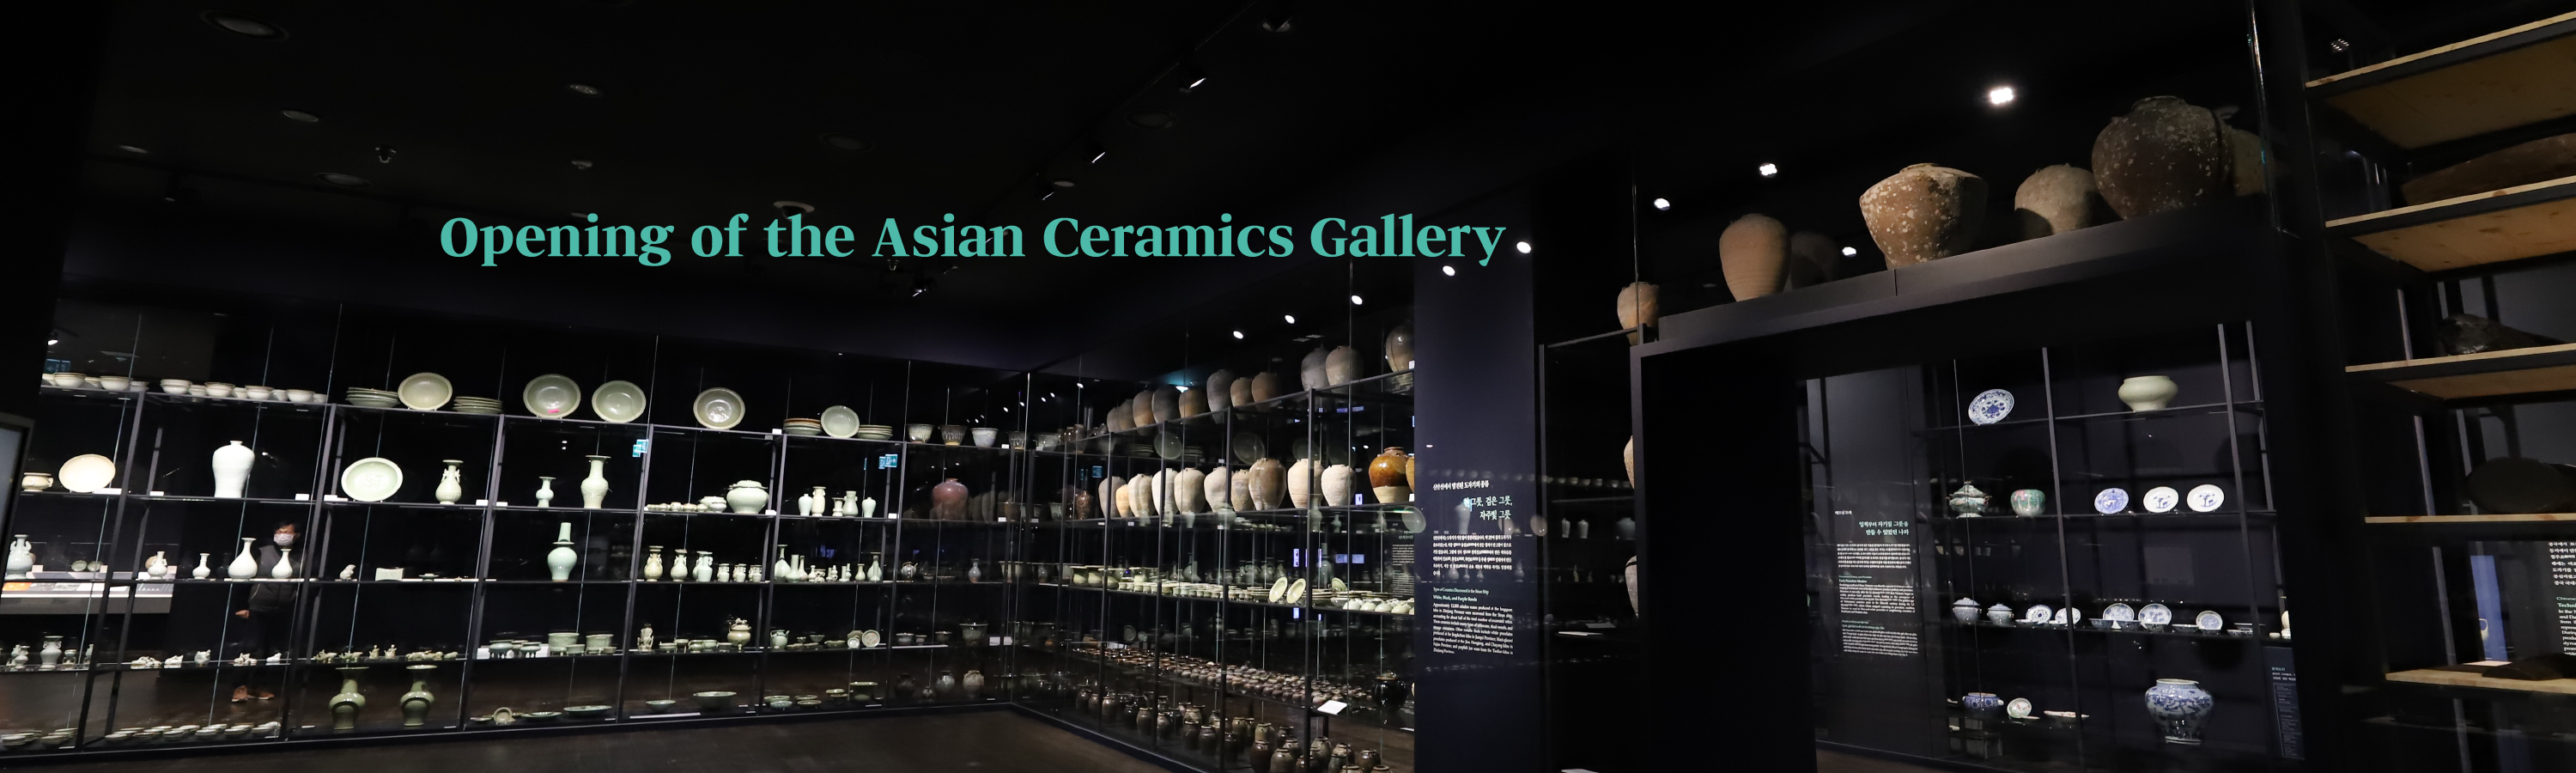 Opening of the Asian Ceramics Gallery